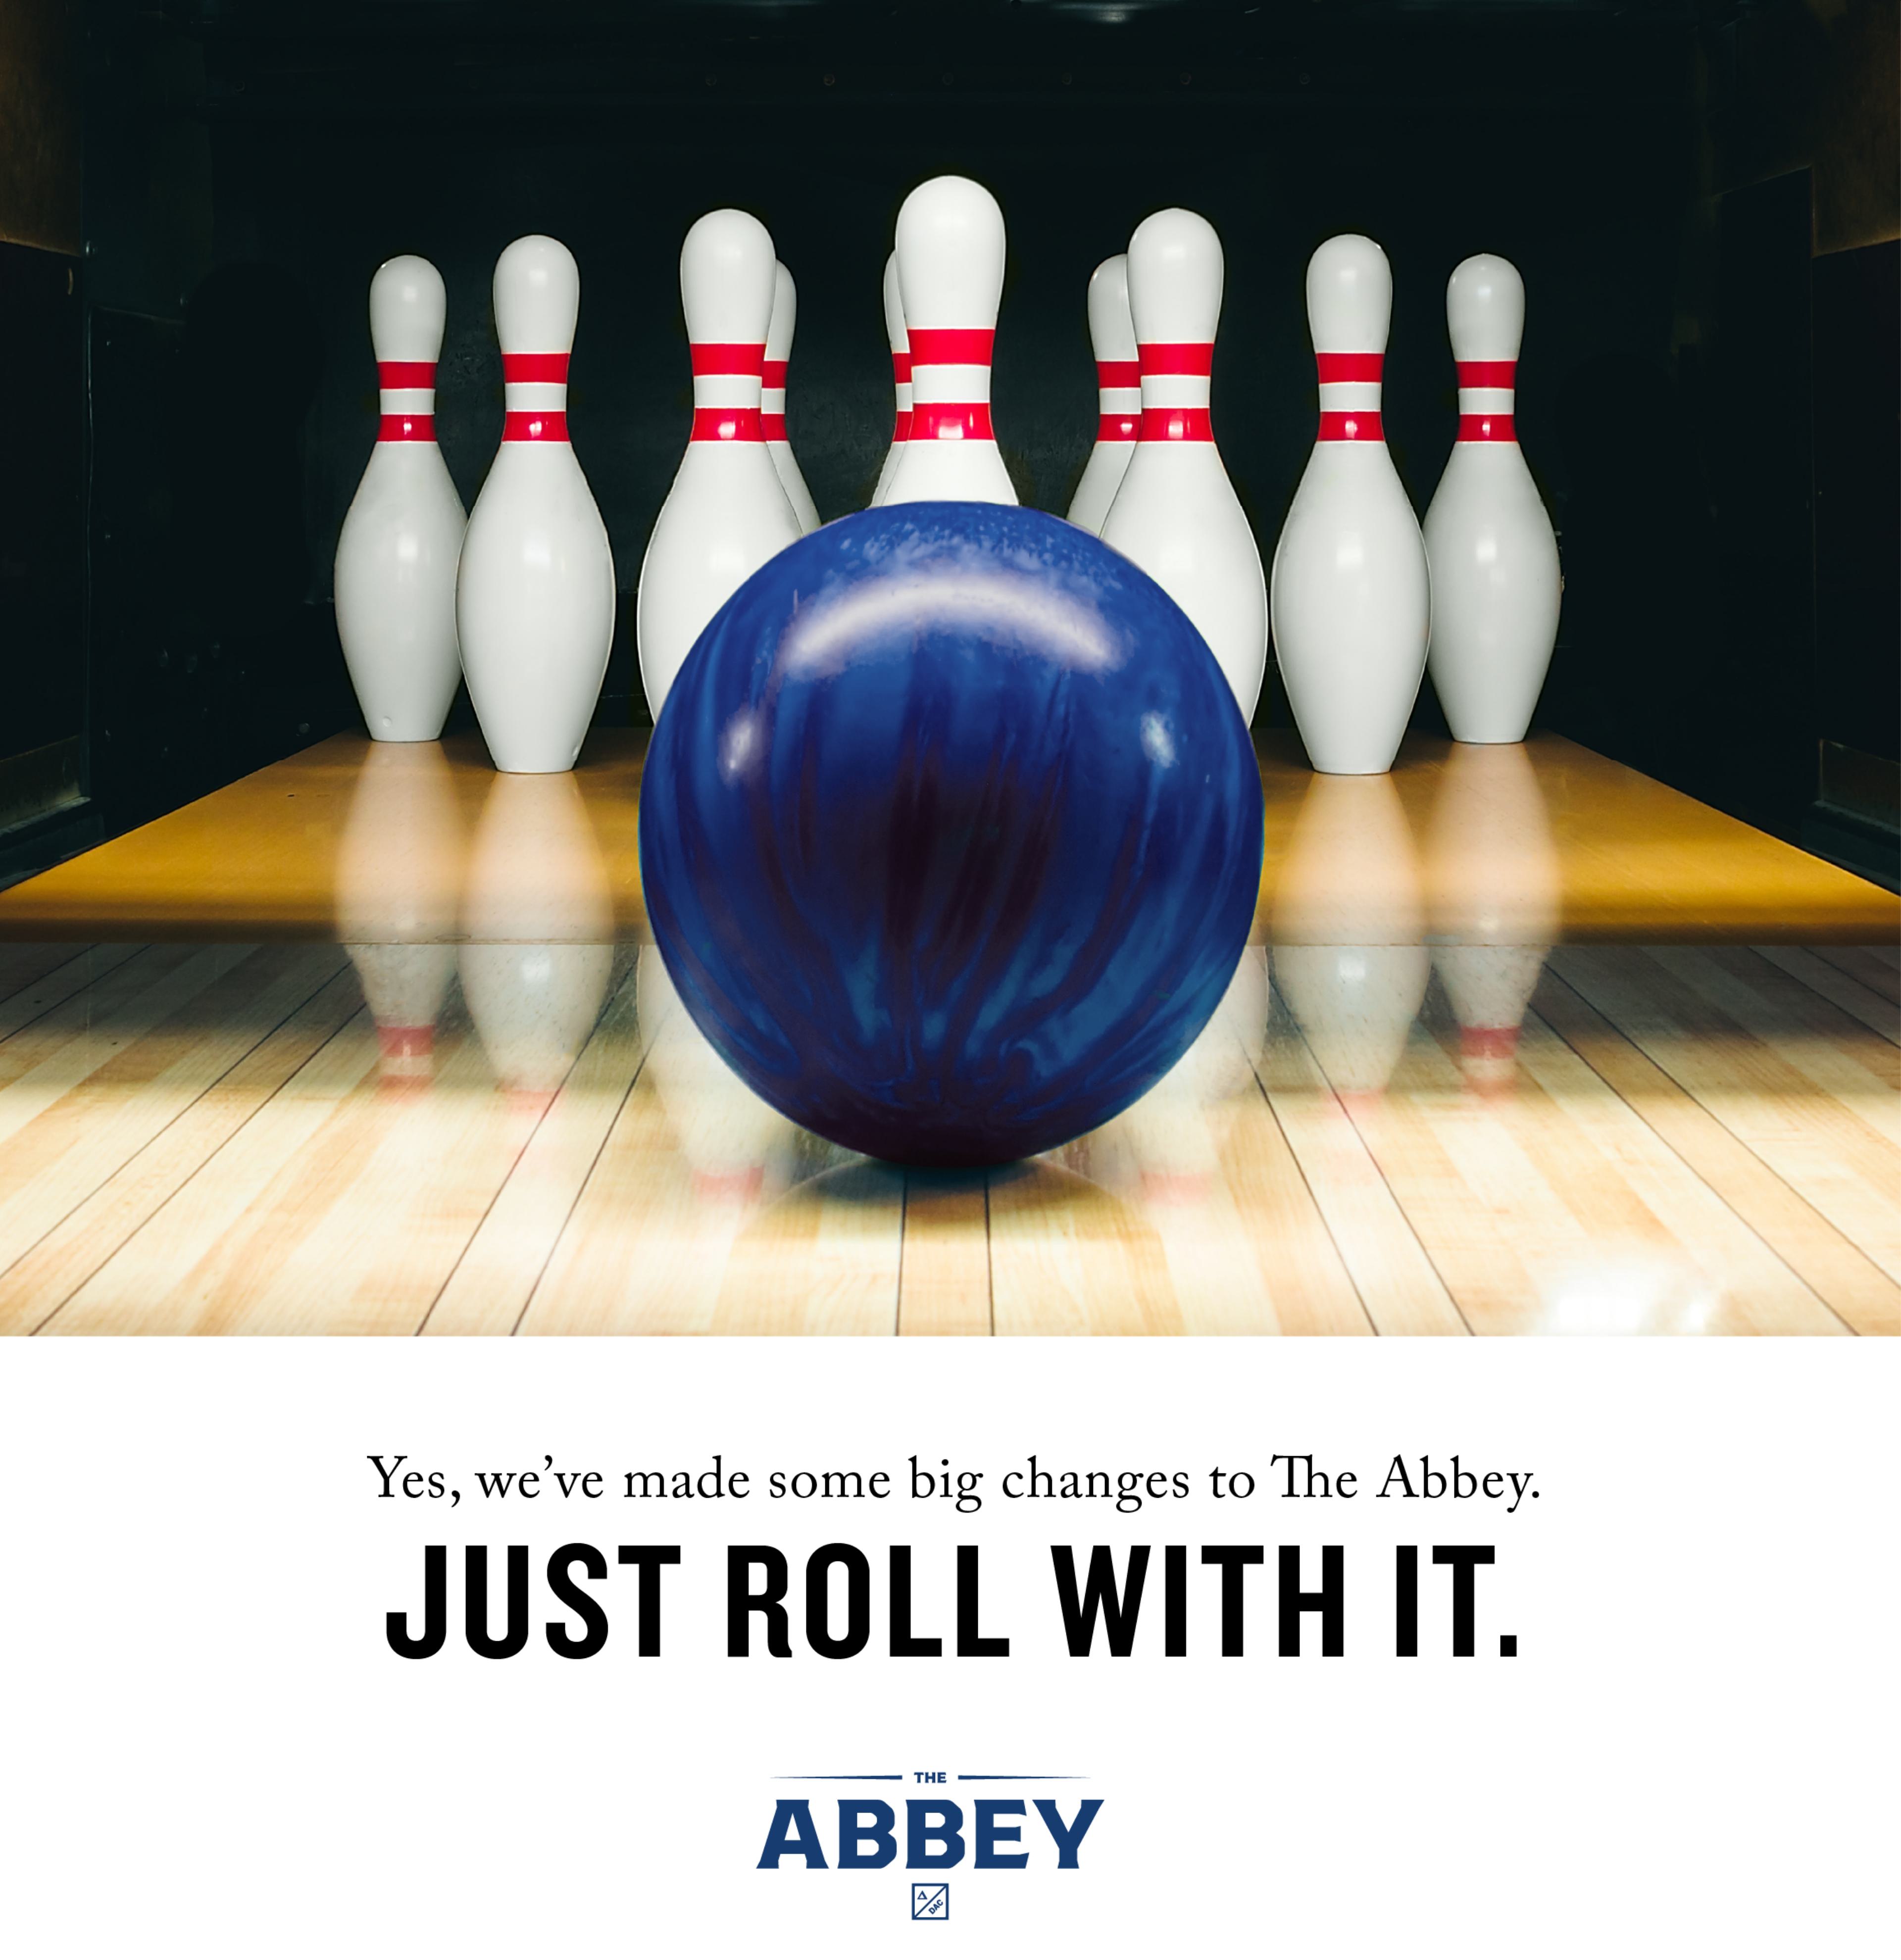 An advertisement for ABBEY with a close up photo of a blue bowling ball at center and front of the 10 pins - Yes, we've made some big chnages to the Abbey. Just roll with it.